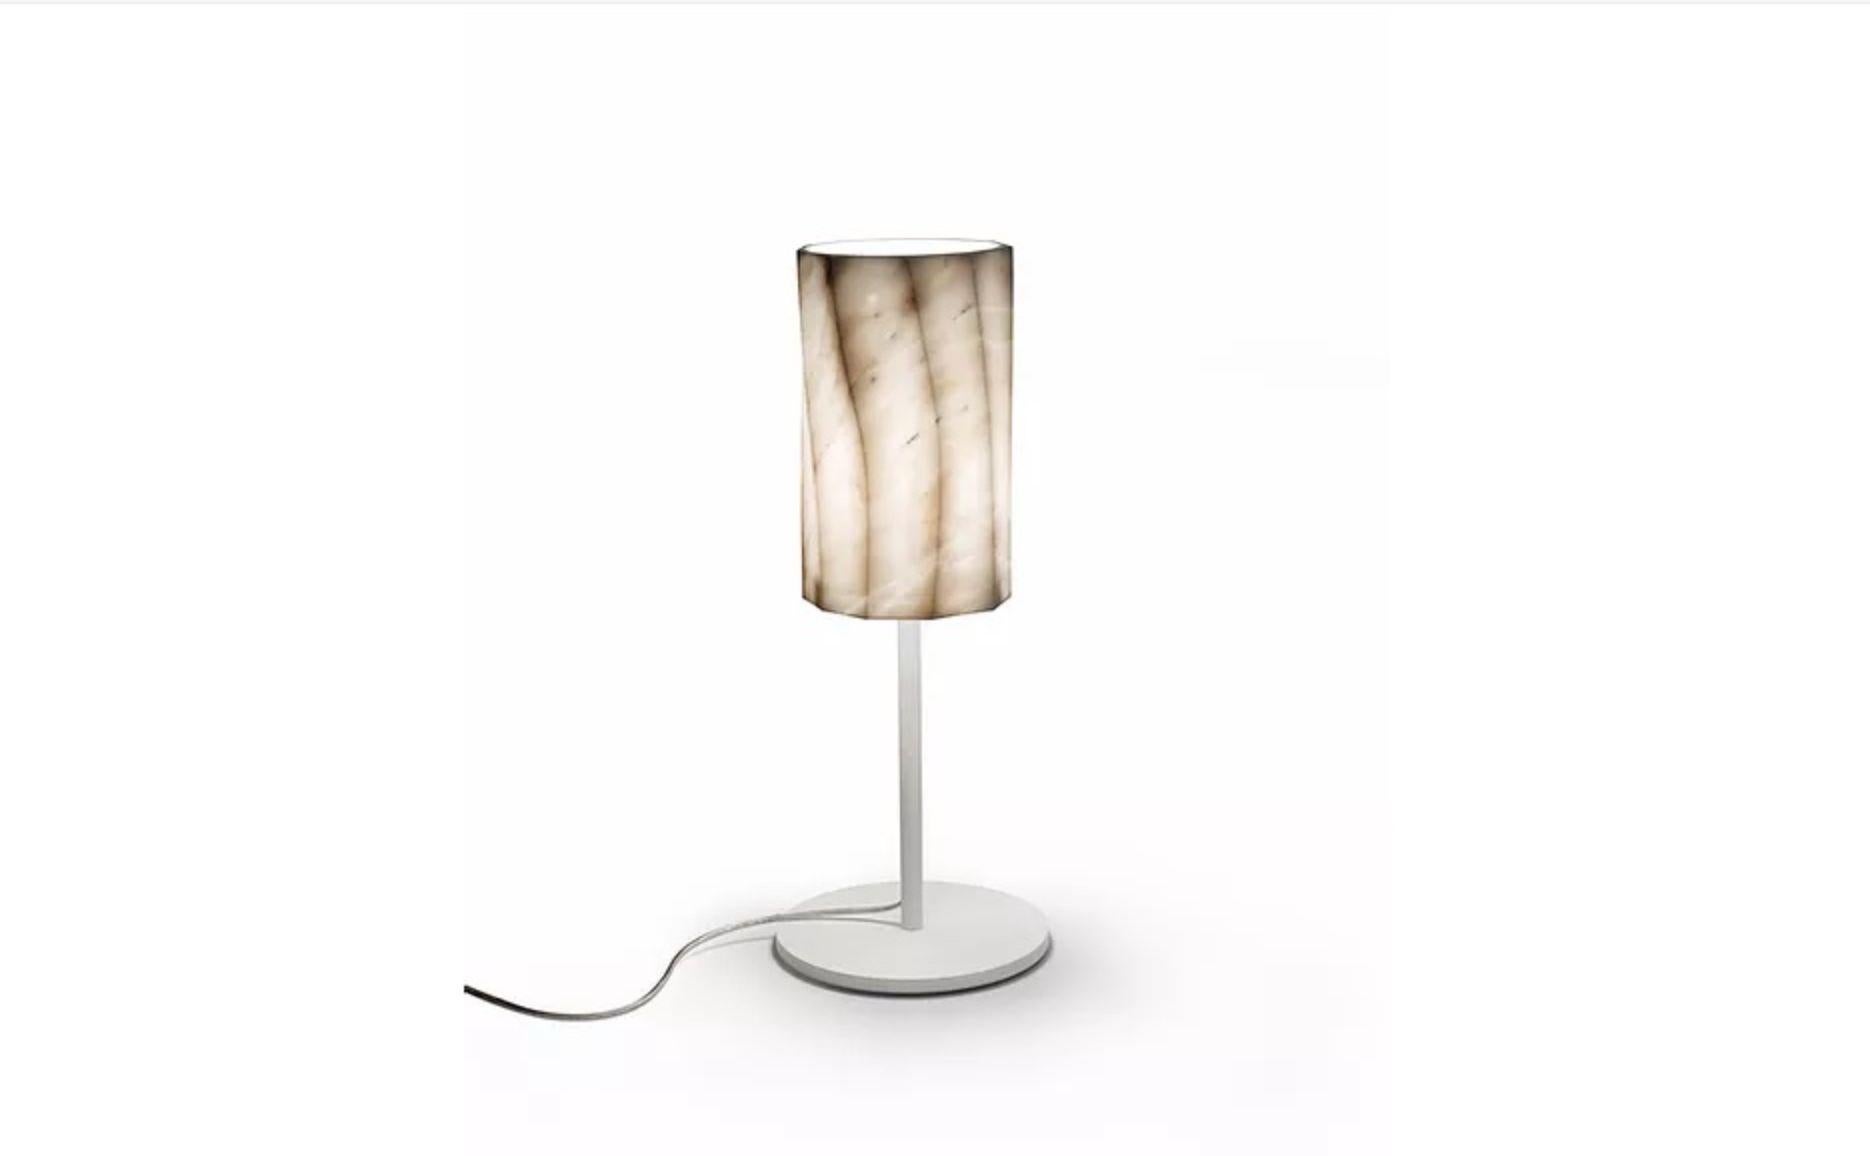 Fiamma marble table lamp by Marmi Serafini
Materials: Calacatta marble
Dimensions: Ø 20, H 50 cm

All our lamps can be wired according to each country. If sold to the USA it will be wired for the USA for instance.
The stone material of